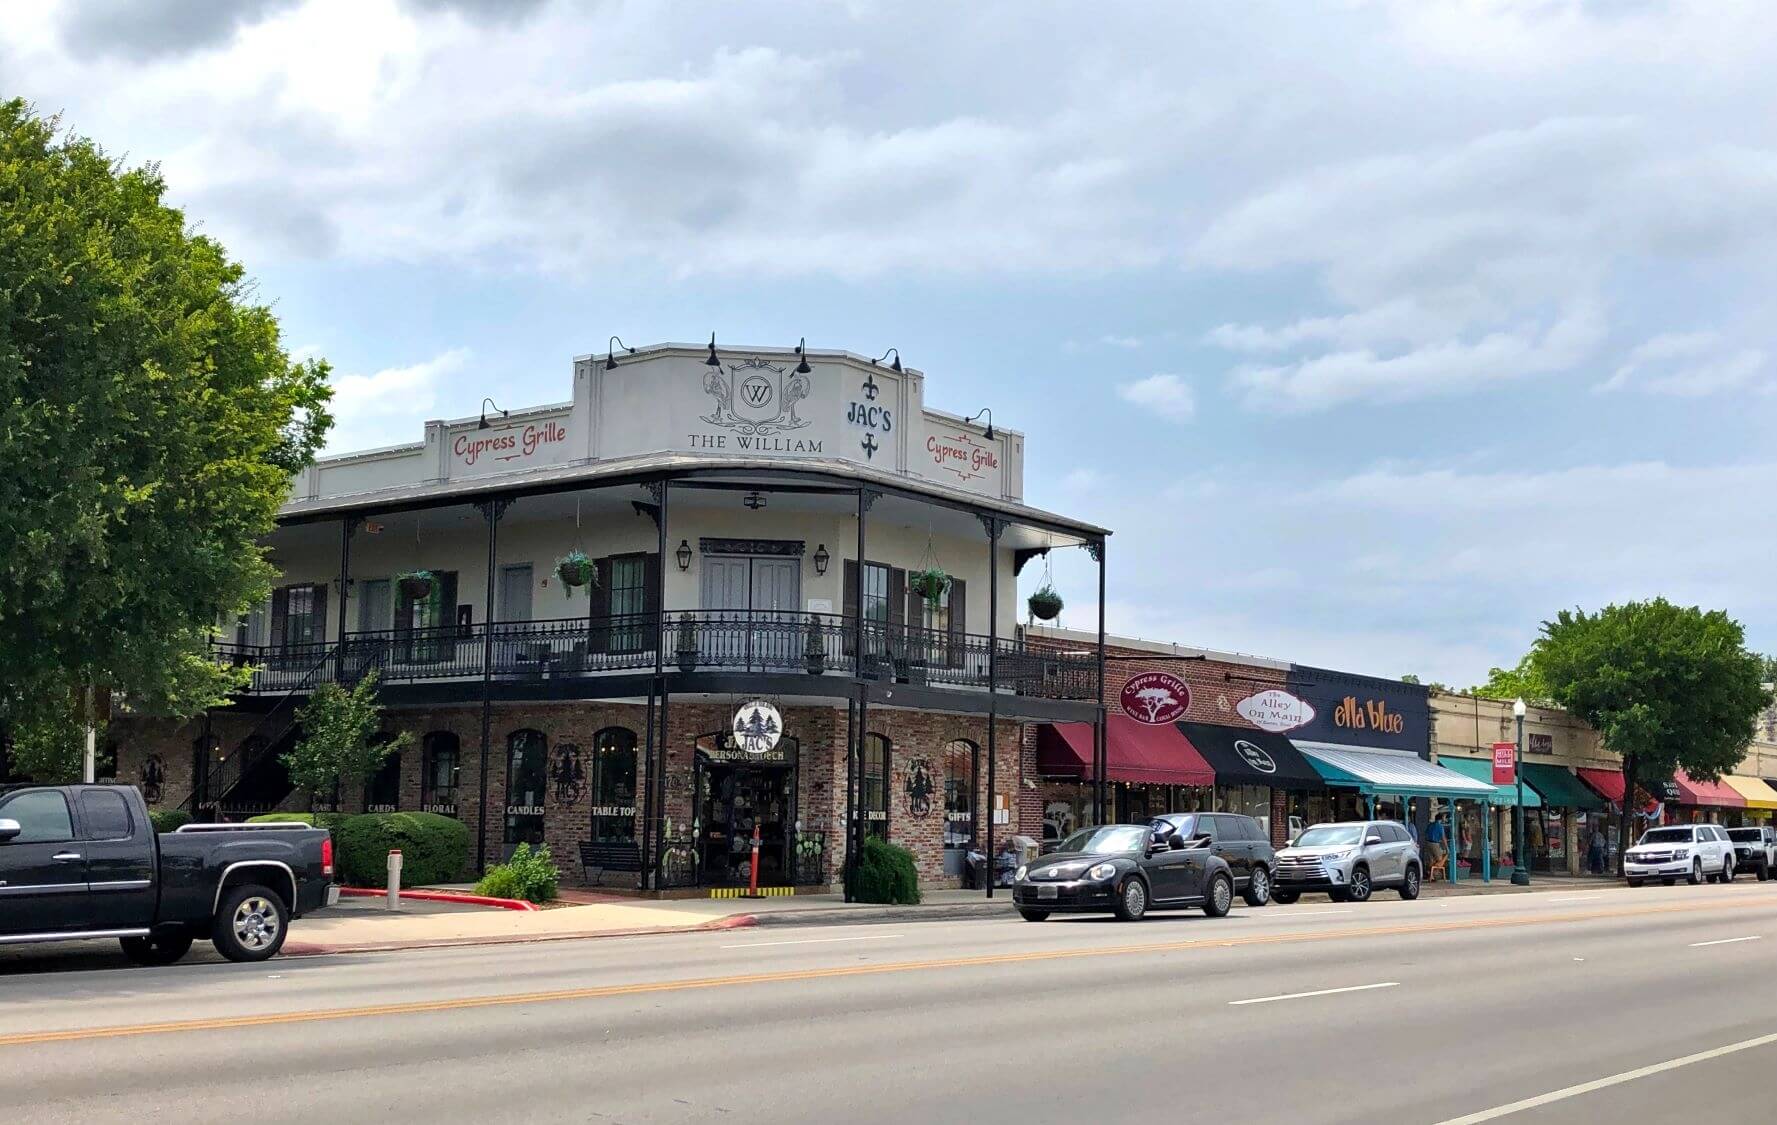 Hill Country Mile in Boerne, Texas with unique buildings on main street